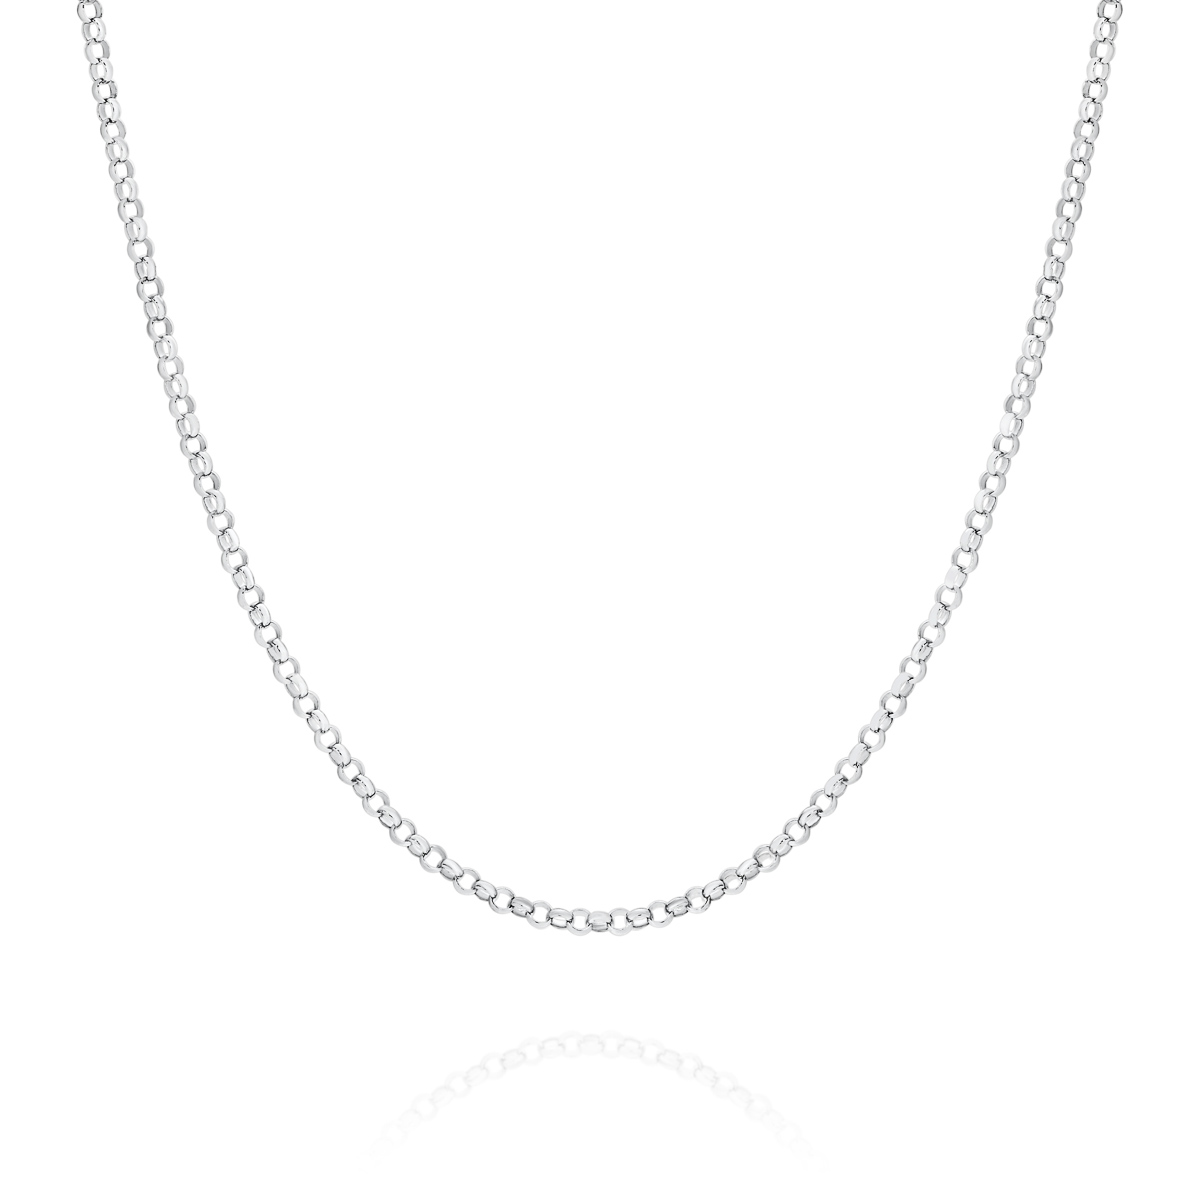 18K White Gold Belcher Link Polished Finish Chain - Small | RFMT035